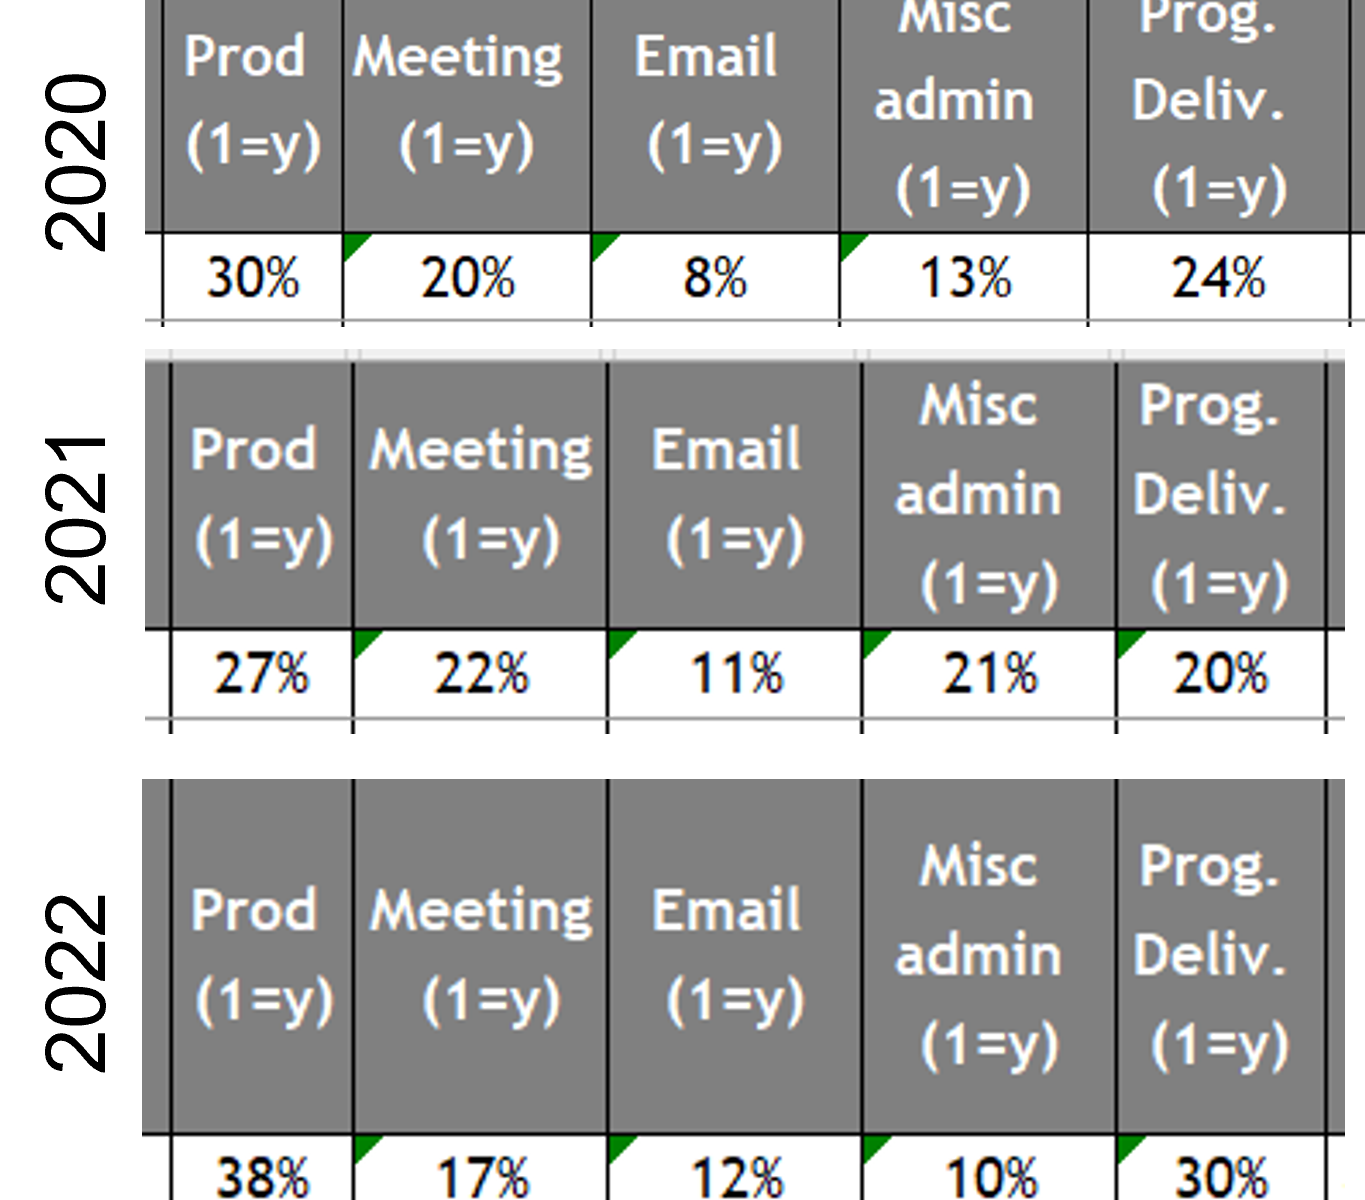 Screenshot shows three main blocks, one for each of three years (2020-2022). In 2020, Product-focused work was 30%, Meetings took 20%, Email 8%, Admin 13%, and Program delivery 24%. In 2021, Product-focused work was 27%, Meetings took 22%, Email 11%, Admin 21%, and Program delivery 20%. In 2022, Product-focused work was 38%, Meetings took 17%, Email 12%, Admin 10%, and Program delivery 30%. Numbers do not sum to 100, as some activities were coded to multiple categories.